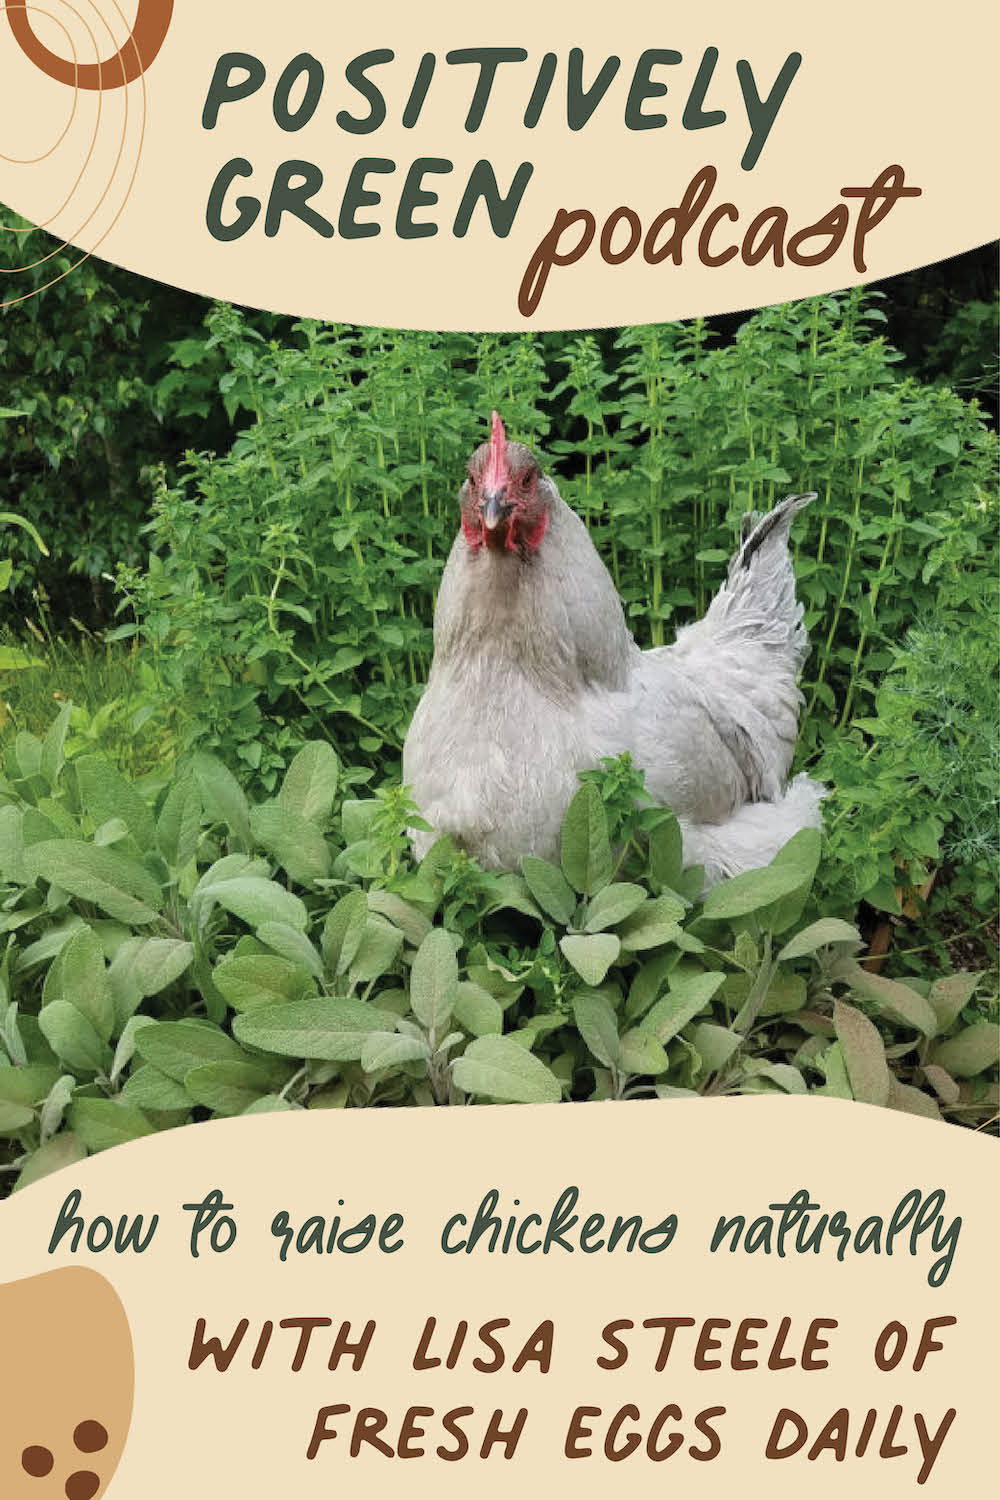 http://www.greenwillowhomestead.com/uploads/2/9/8/5/29854265/raising-chickens-naturally-with-lisa-steele-on-the-positively-green-podcast-for-pinterest_orig.jpg